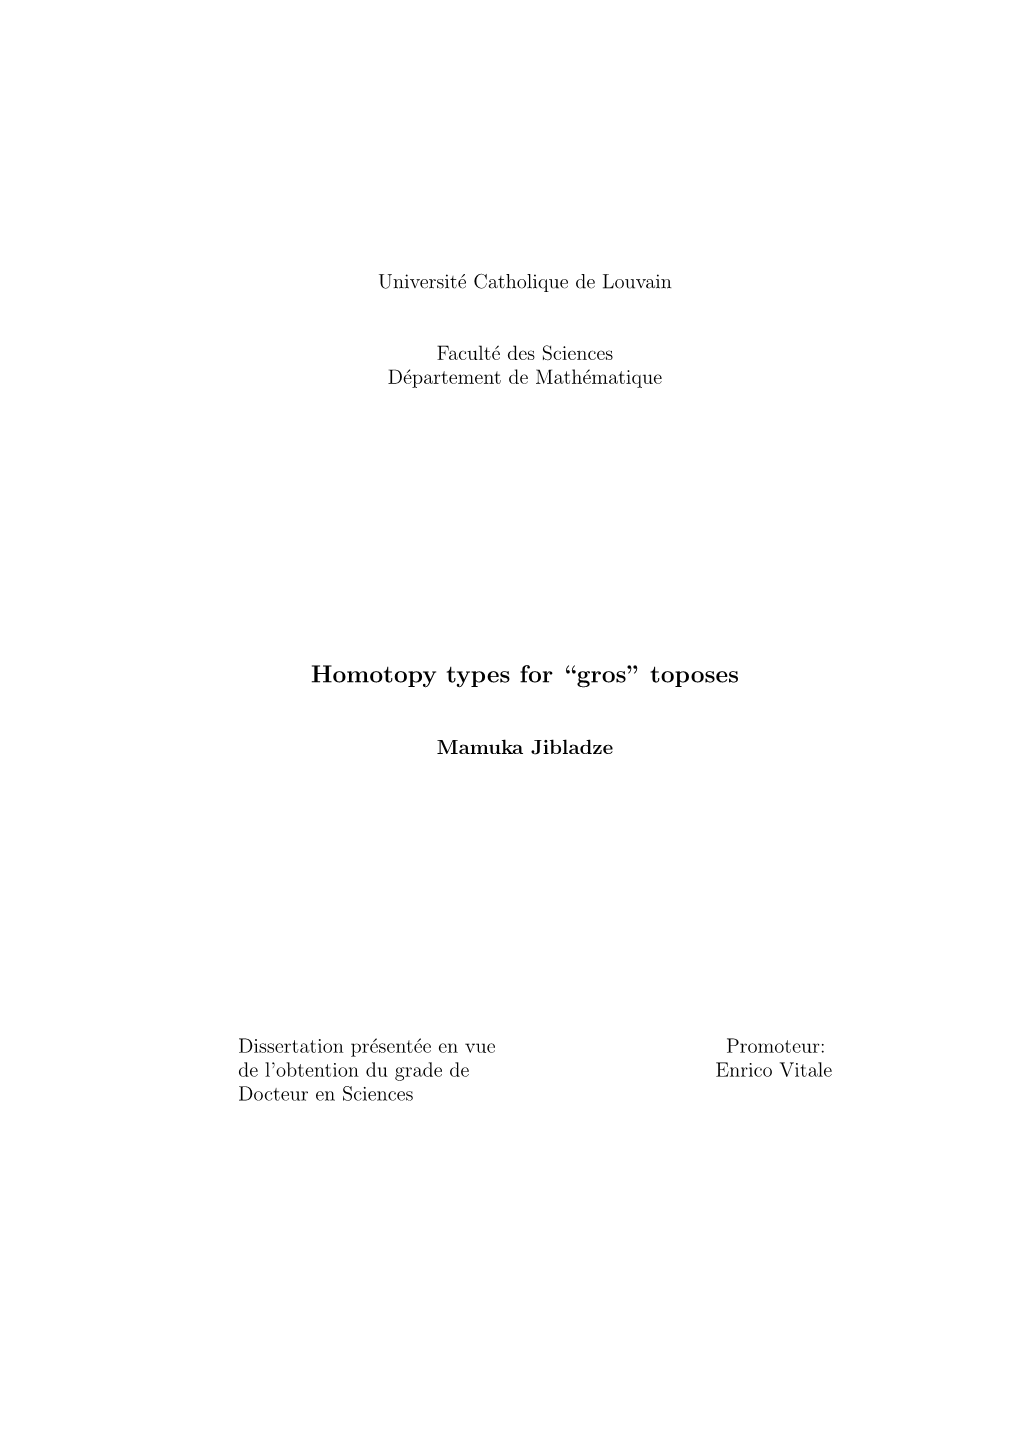 Homotopy Types for “Gros” Toposes